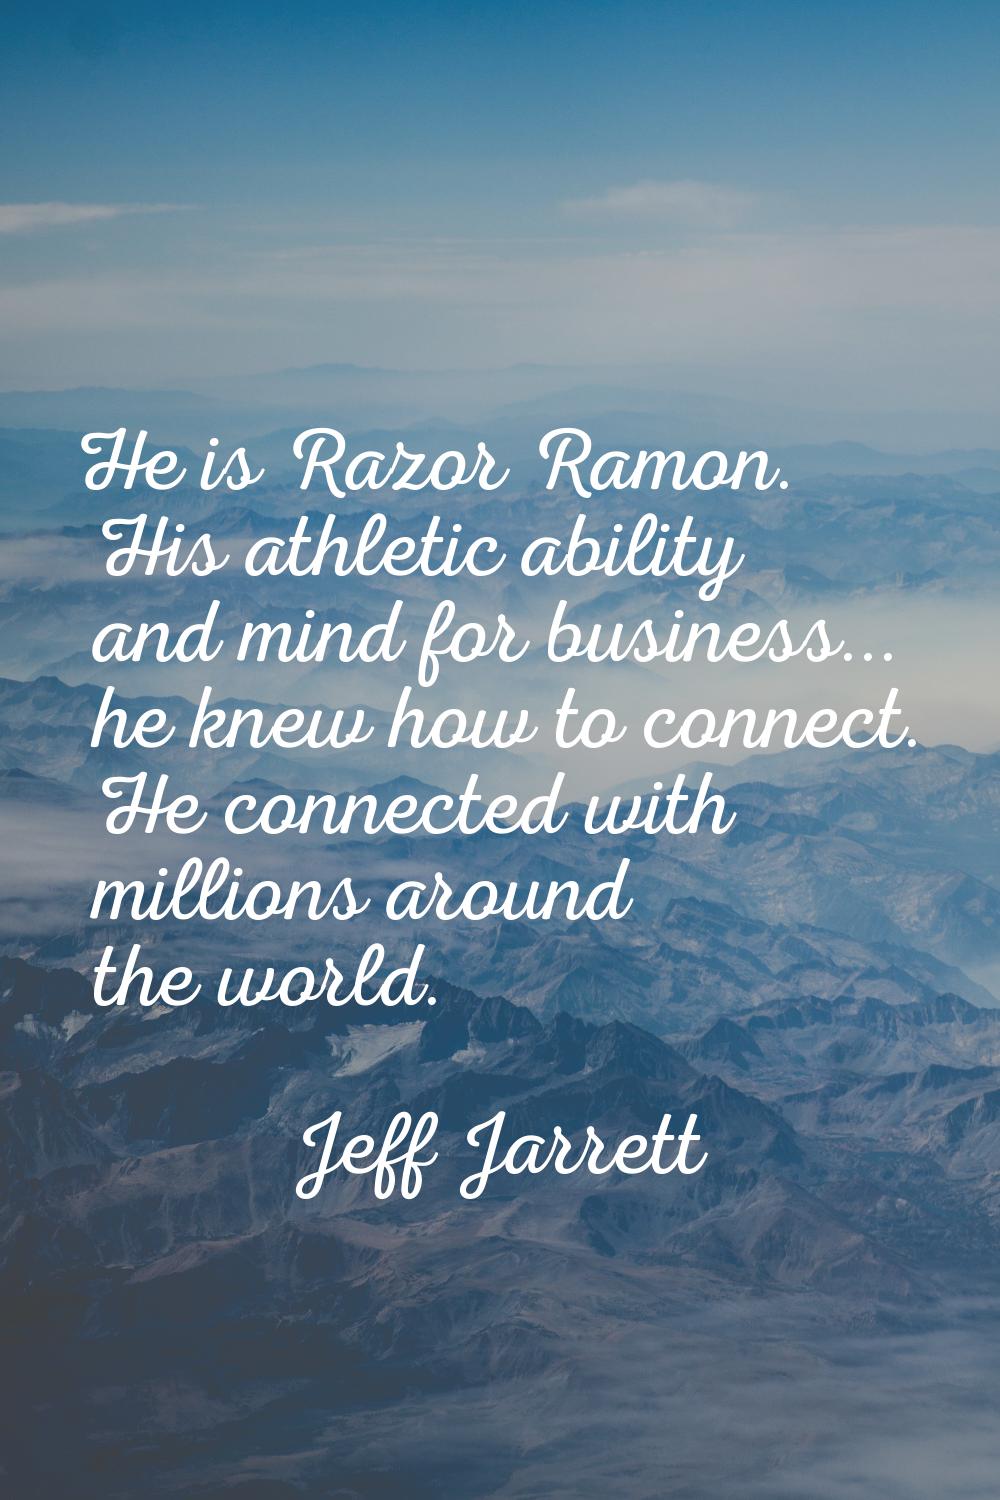 He is Razor Ramon. His athletic ability and mind for business... he knew how to connect. He connect